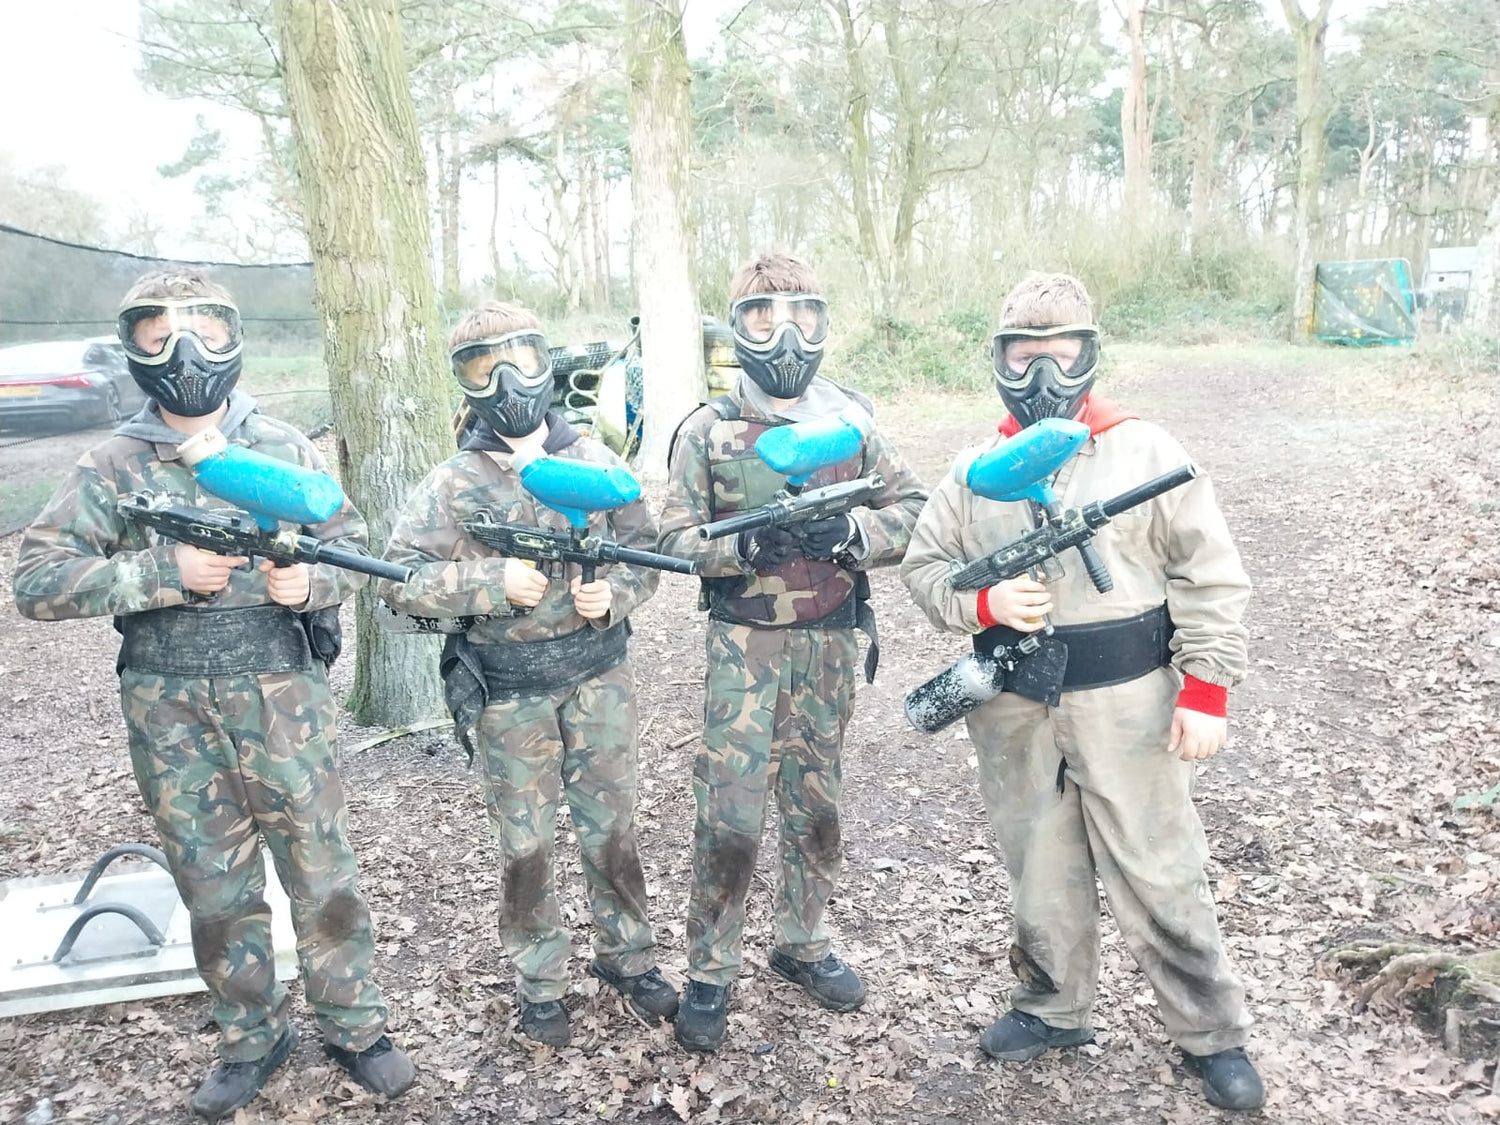 4 kids holding a paintball guns, happy, picture showing them in the woods with the full protective gear on